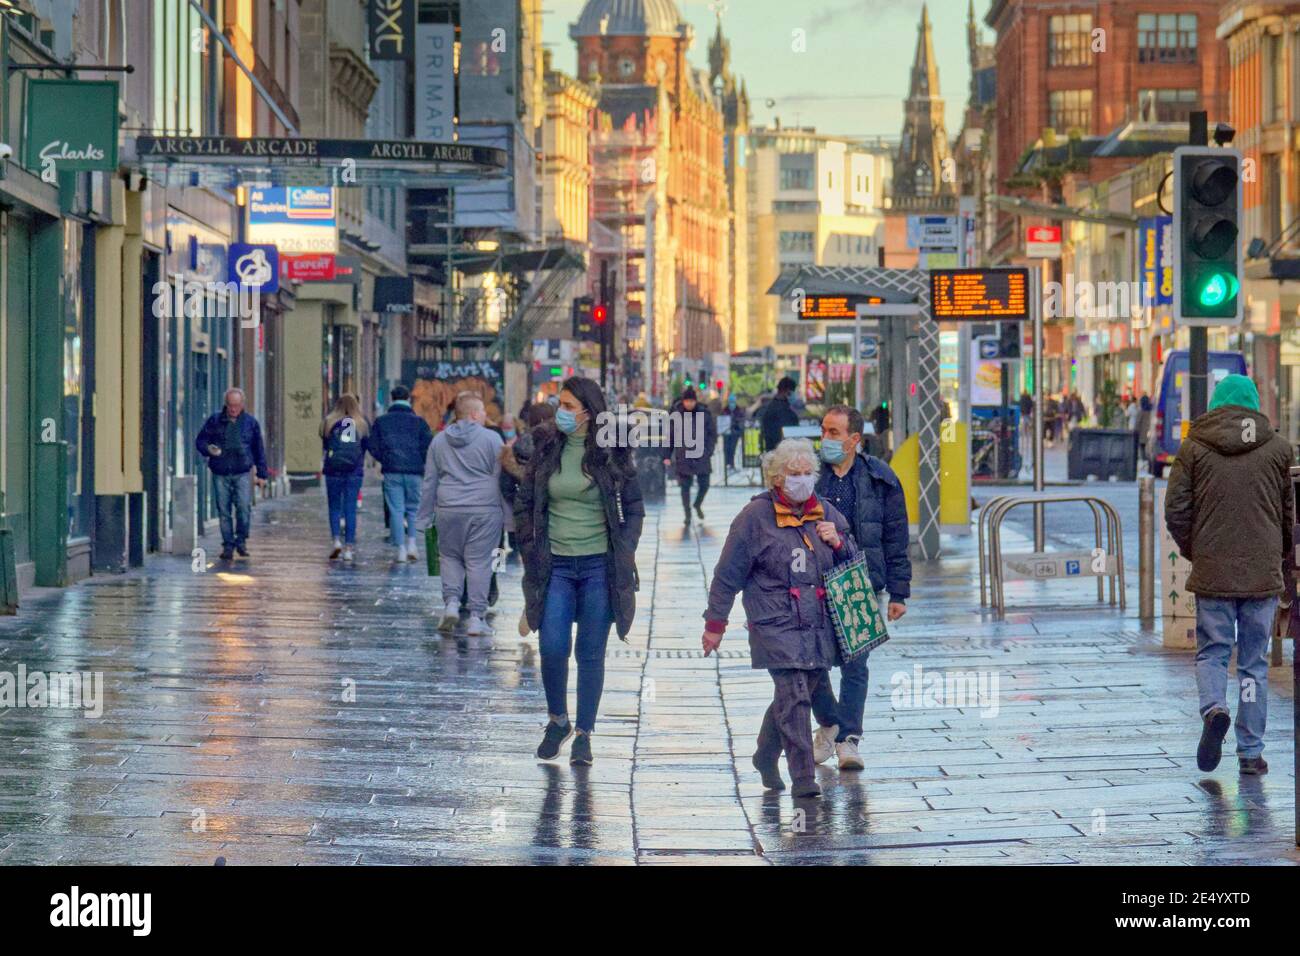 Glasgow, Scotland, UK. 25th January, 2021Lockdown Monday was really busy as deserted streets of Saturday in the town centre shopping areas filled with chasing the bright sunshine with little to